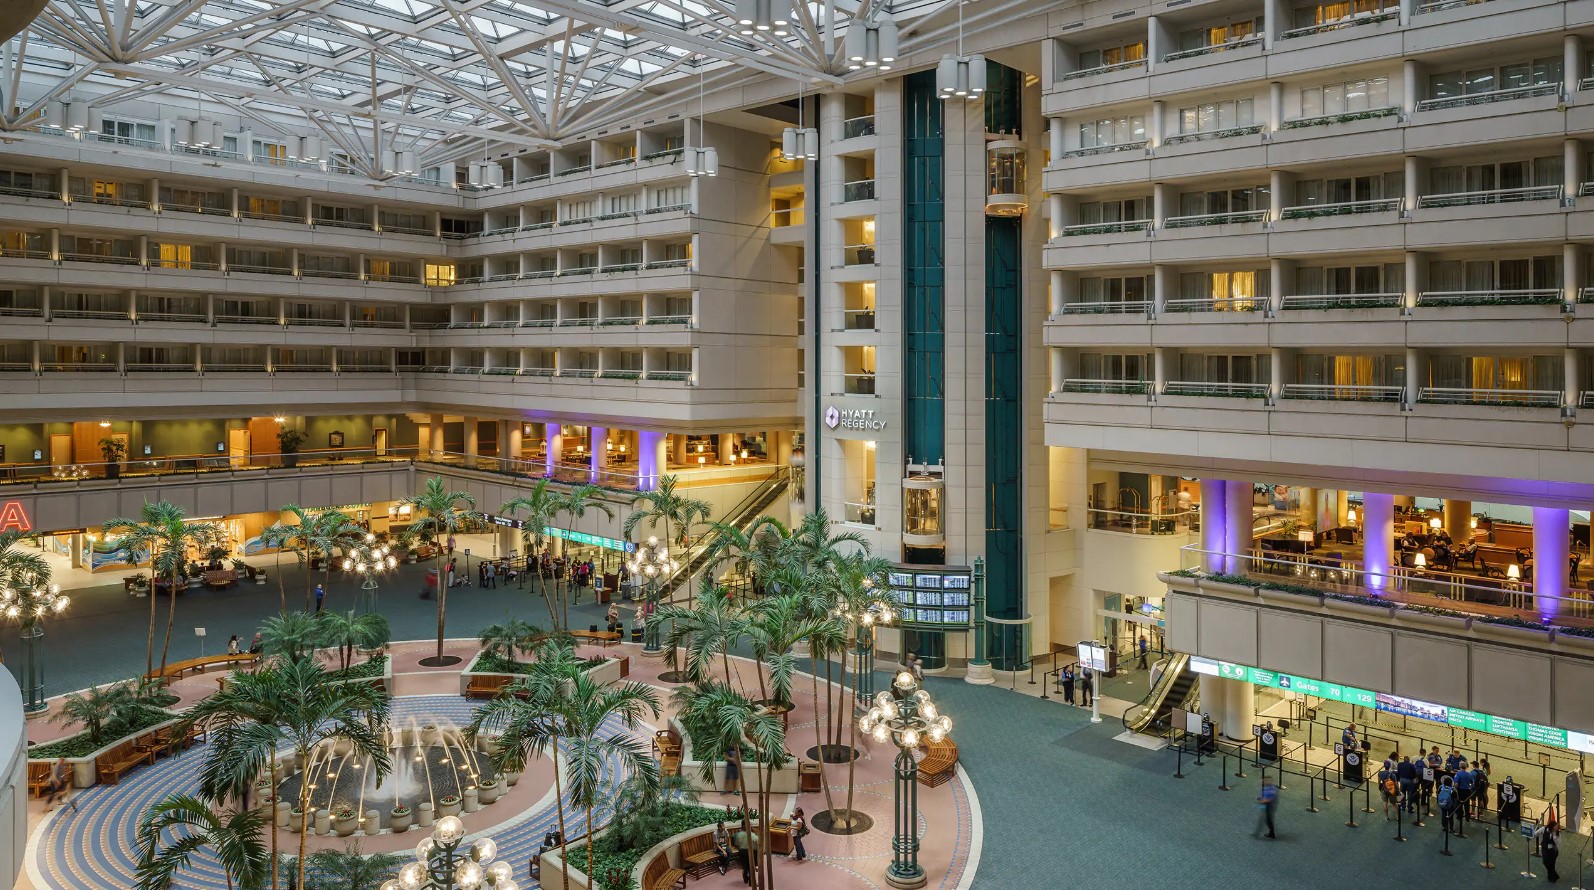 Where can I find Orlando Airport Parking discounts and coupons? - Our